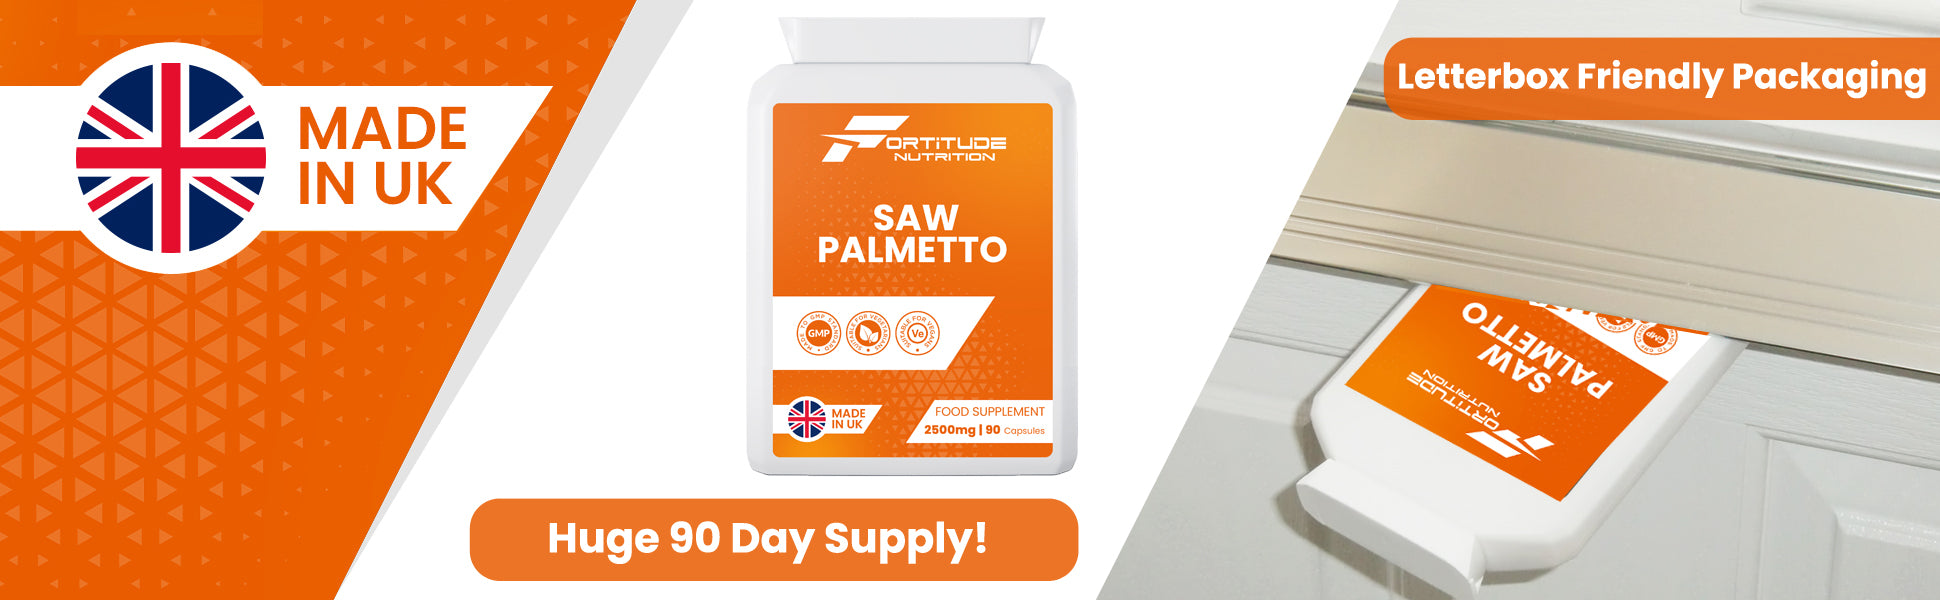 Saw Palmetto Supplements In Letterbox Friendly Packaging